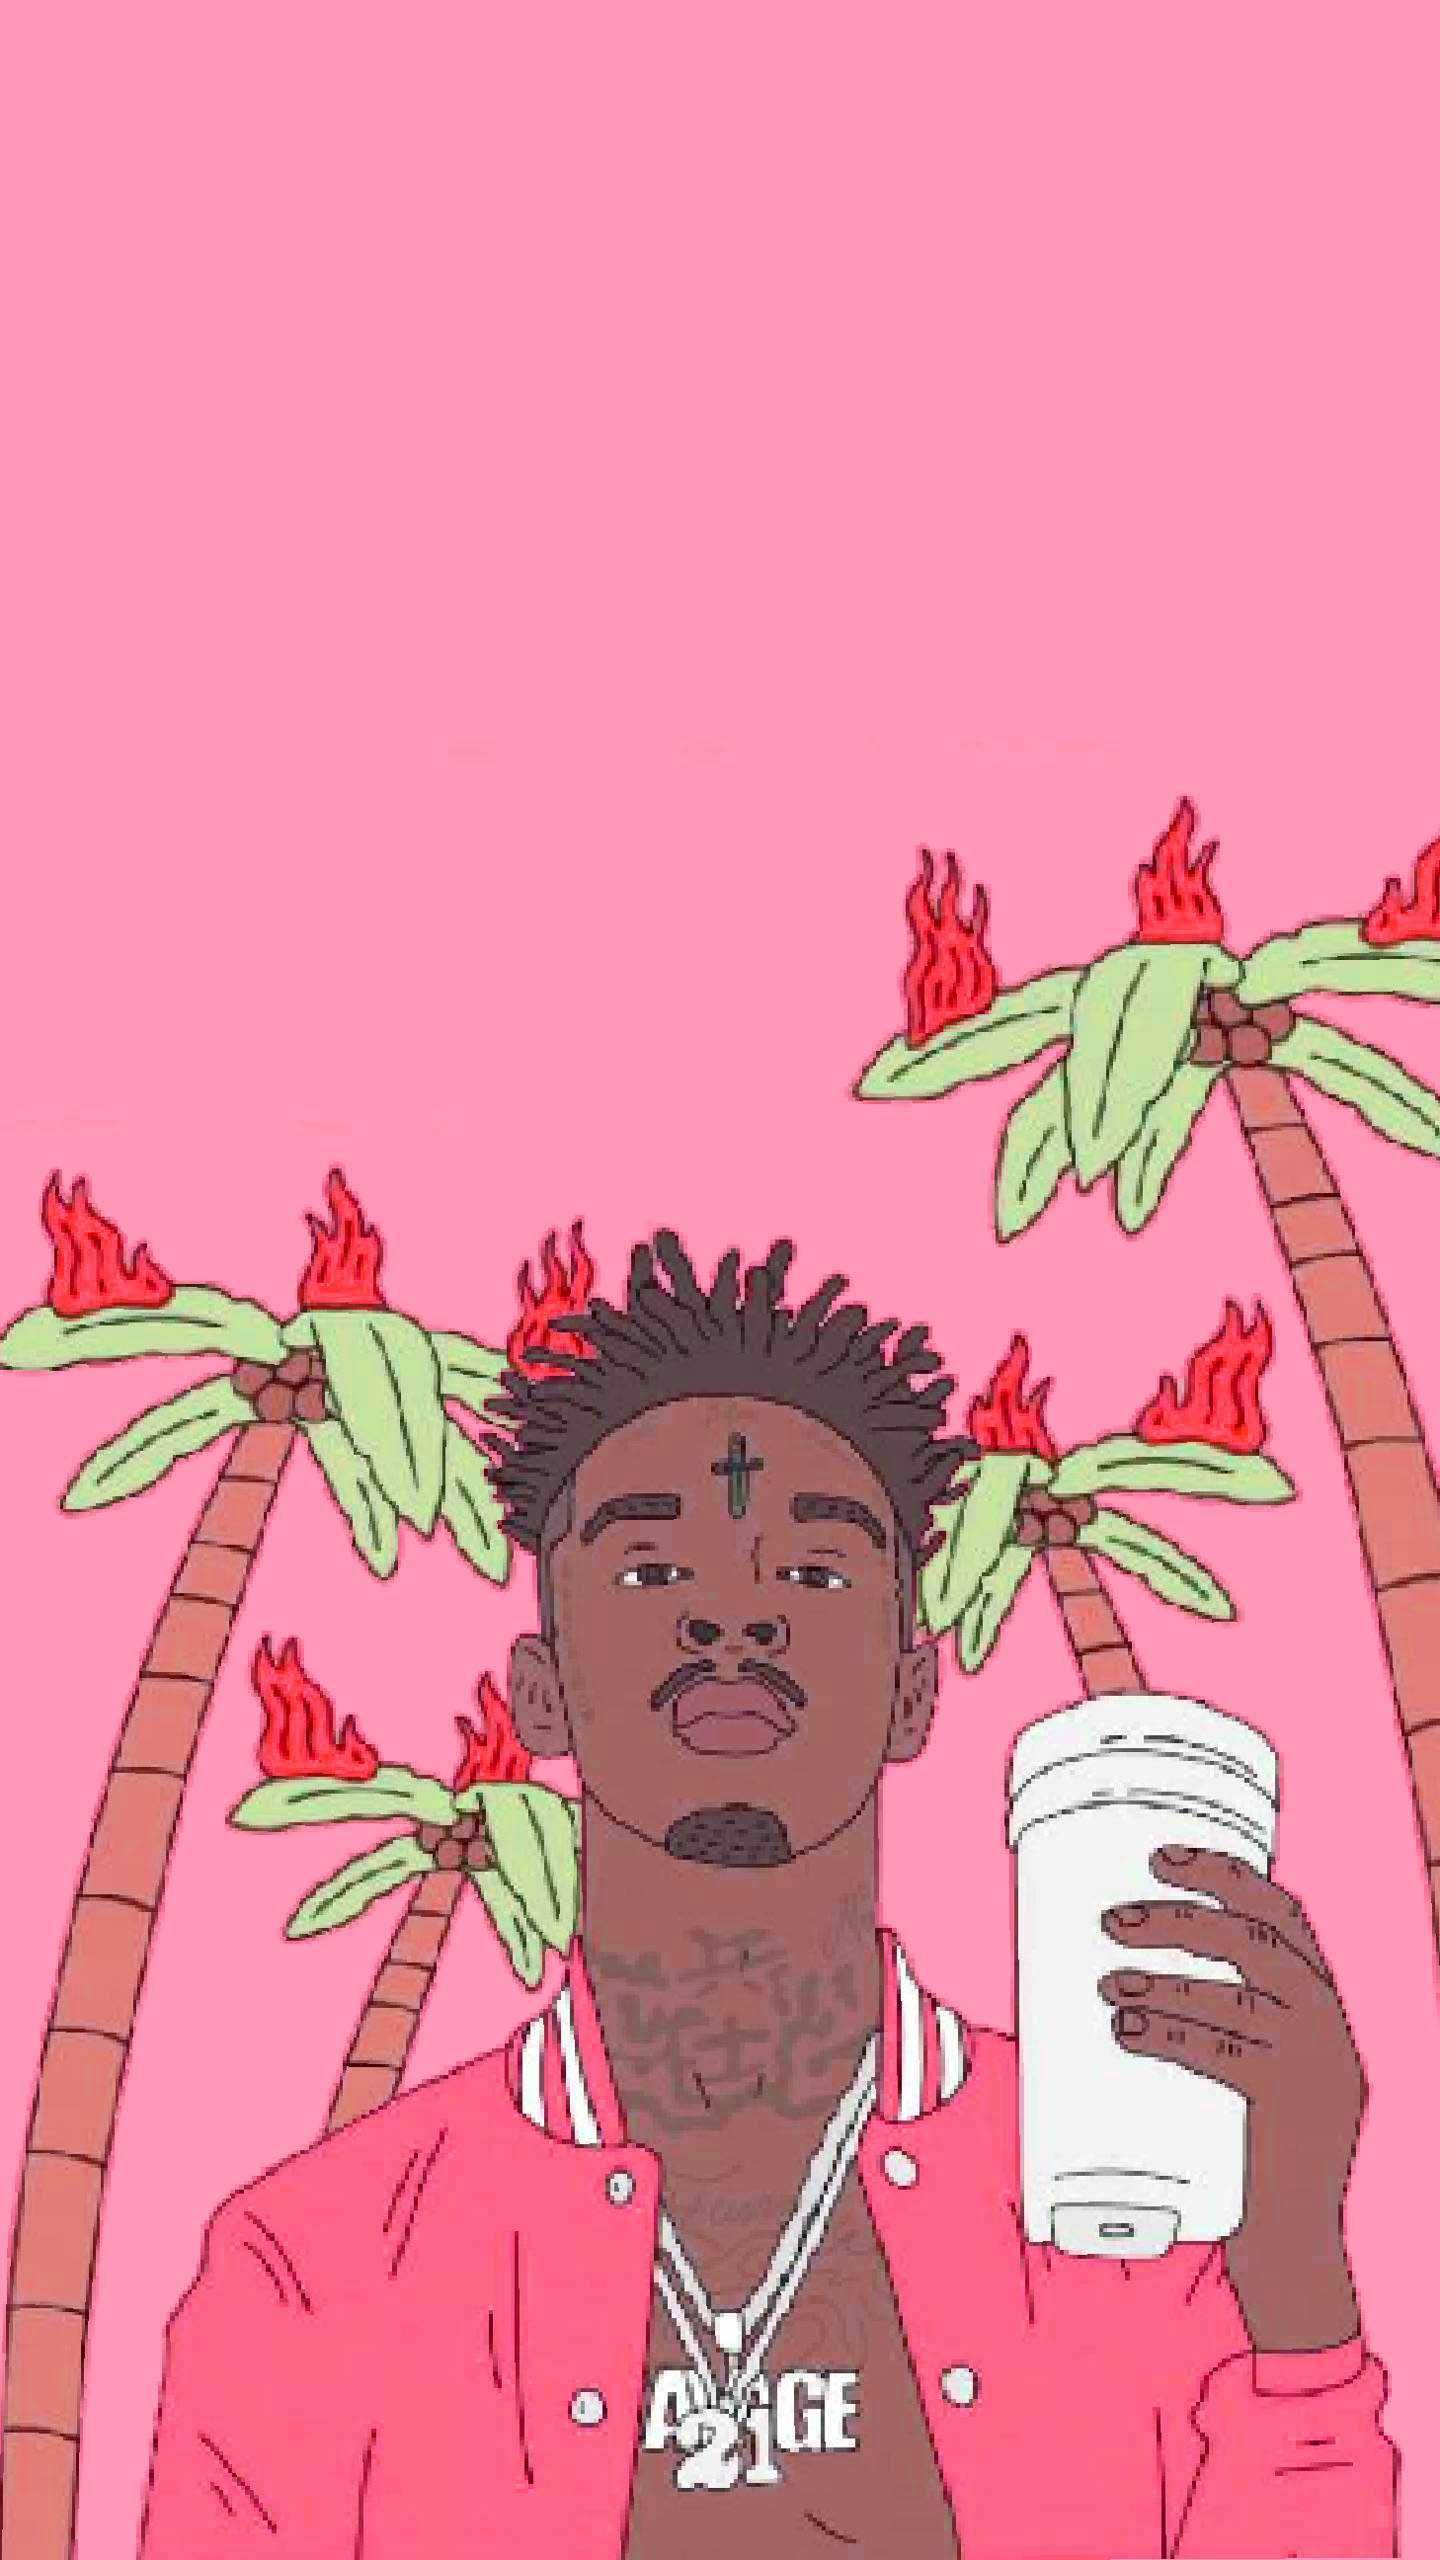 Savage Wallpaper Discover more 21 Savage, Hip Hop, Music, Rap, Rapper wallpaper. /88471/. Savage wallpaper, 21 savage, Savage picture